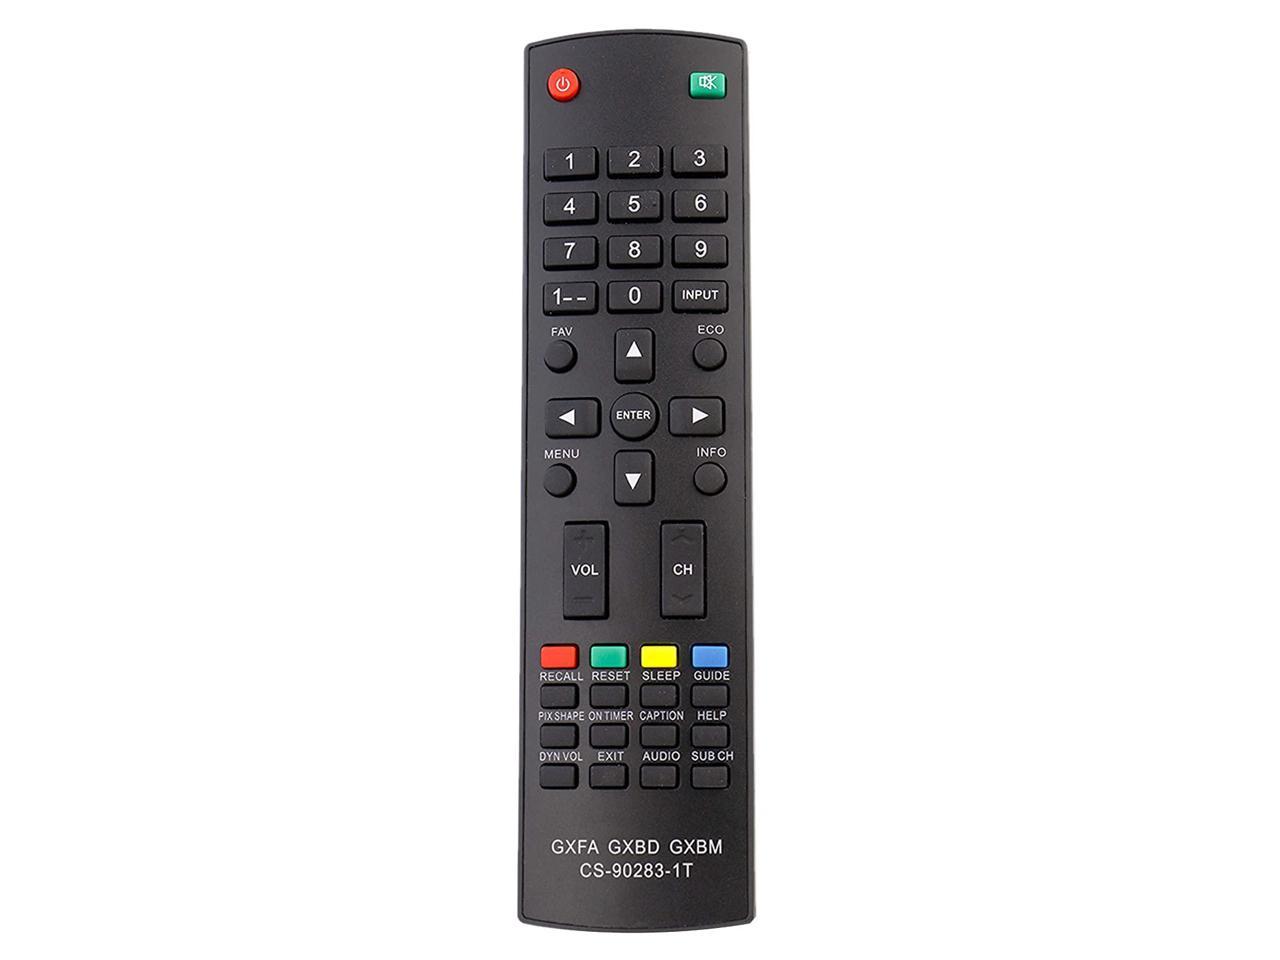 New GXFA GXBD GXBM CS-90283-1T Replaced Remote fit for Sanyo TV GXCC